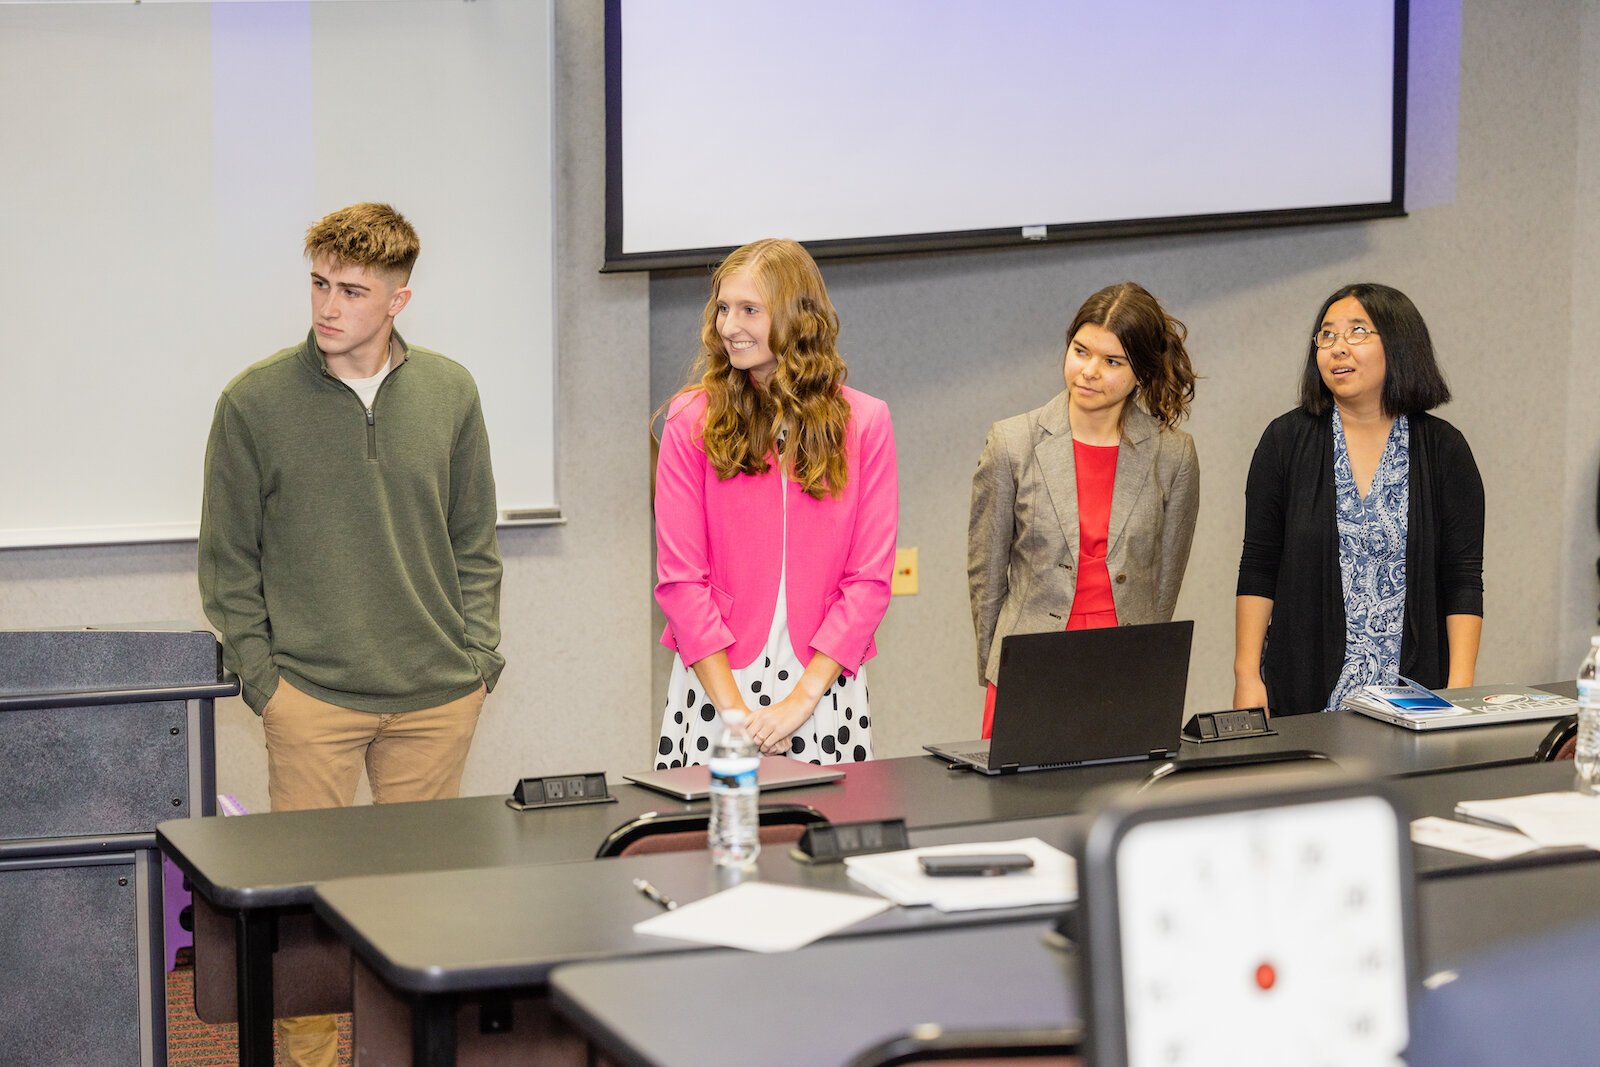 Students prepare to pitch their business plan for a chance to win $5,000.